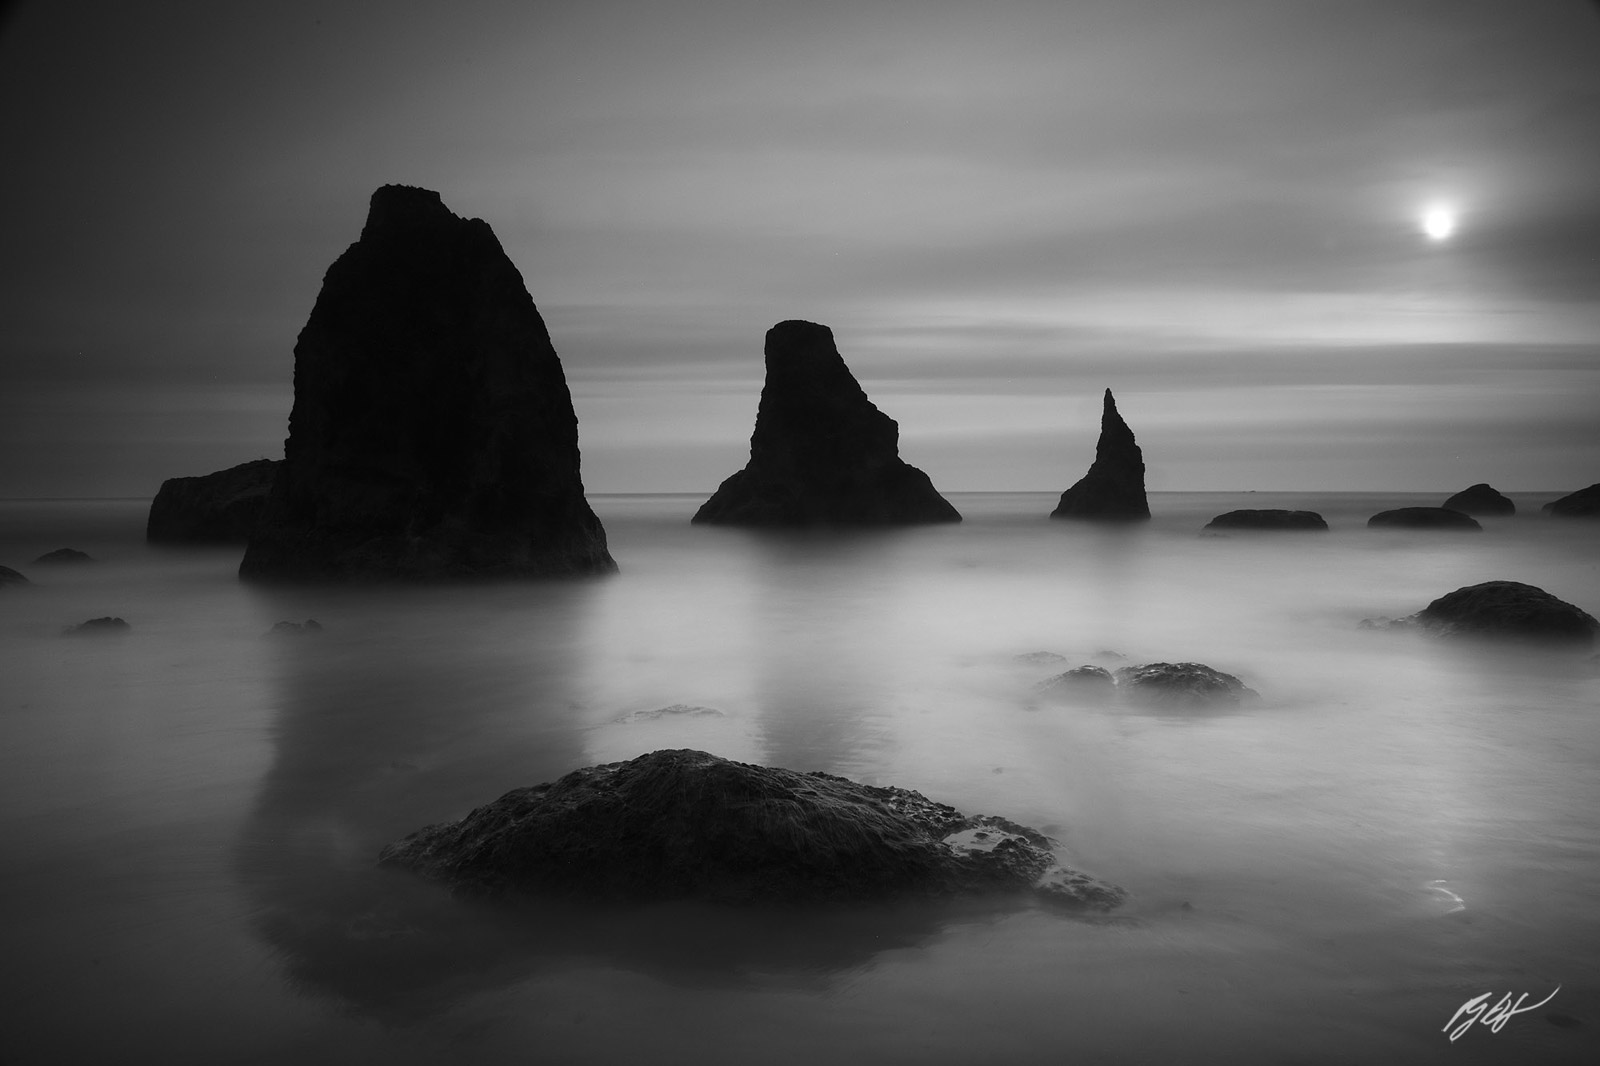 Floating Sea Stacks from Face Rock Beach in Bandon on the Southern Oregon Coast